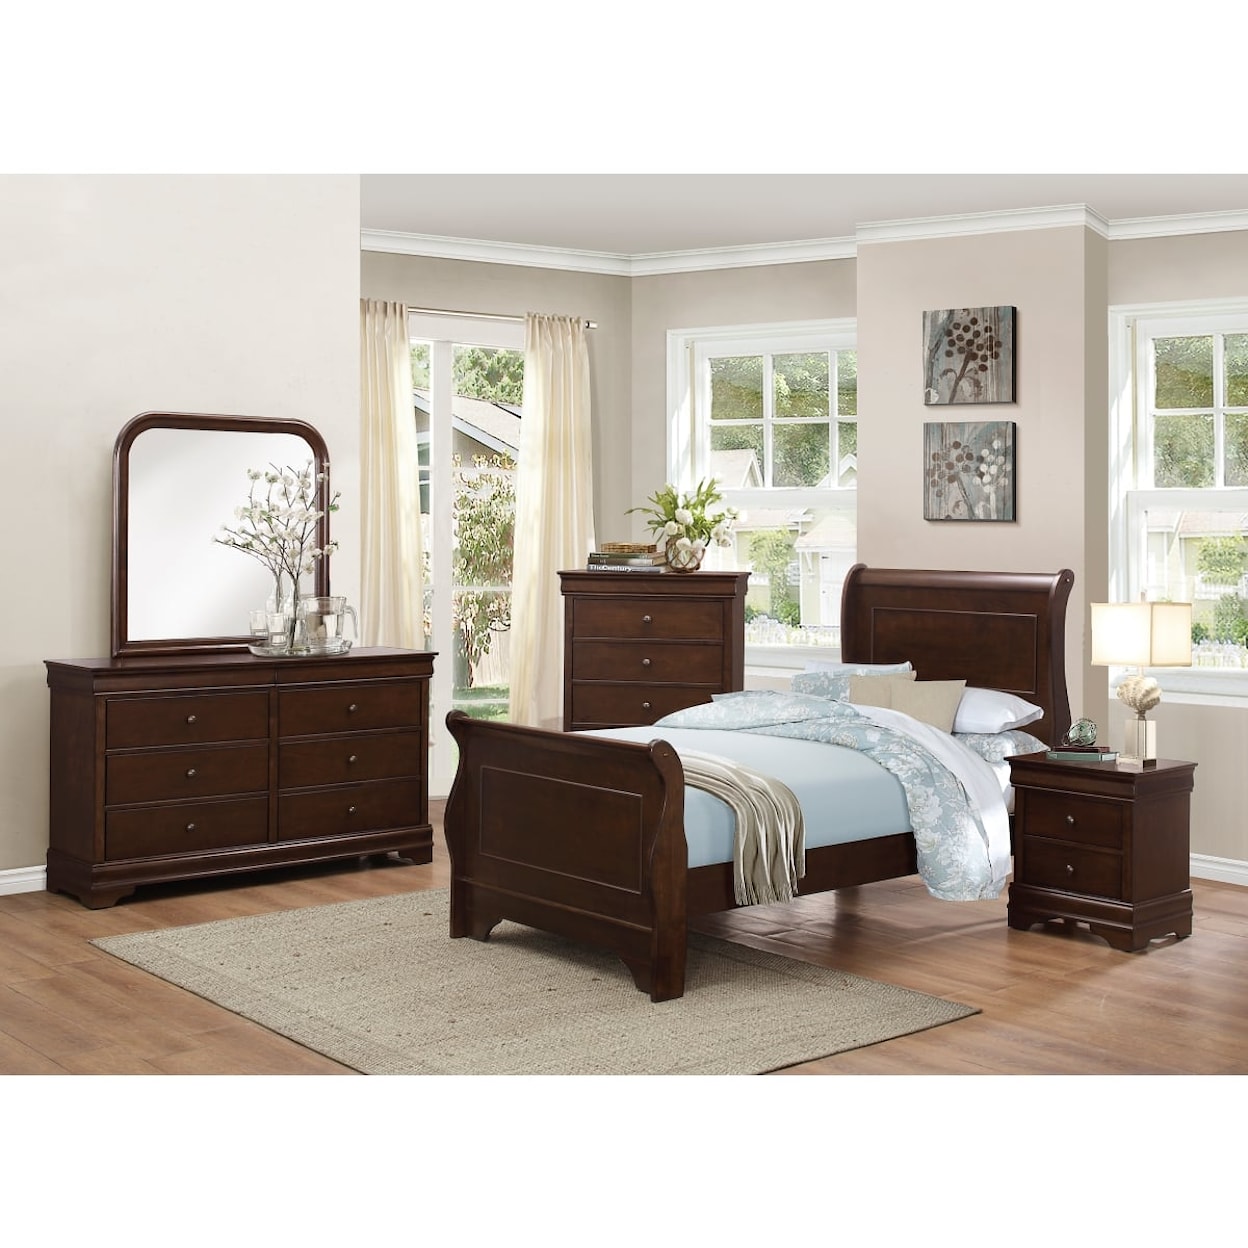 Homelegance Abbeville Twin Bed